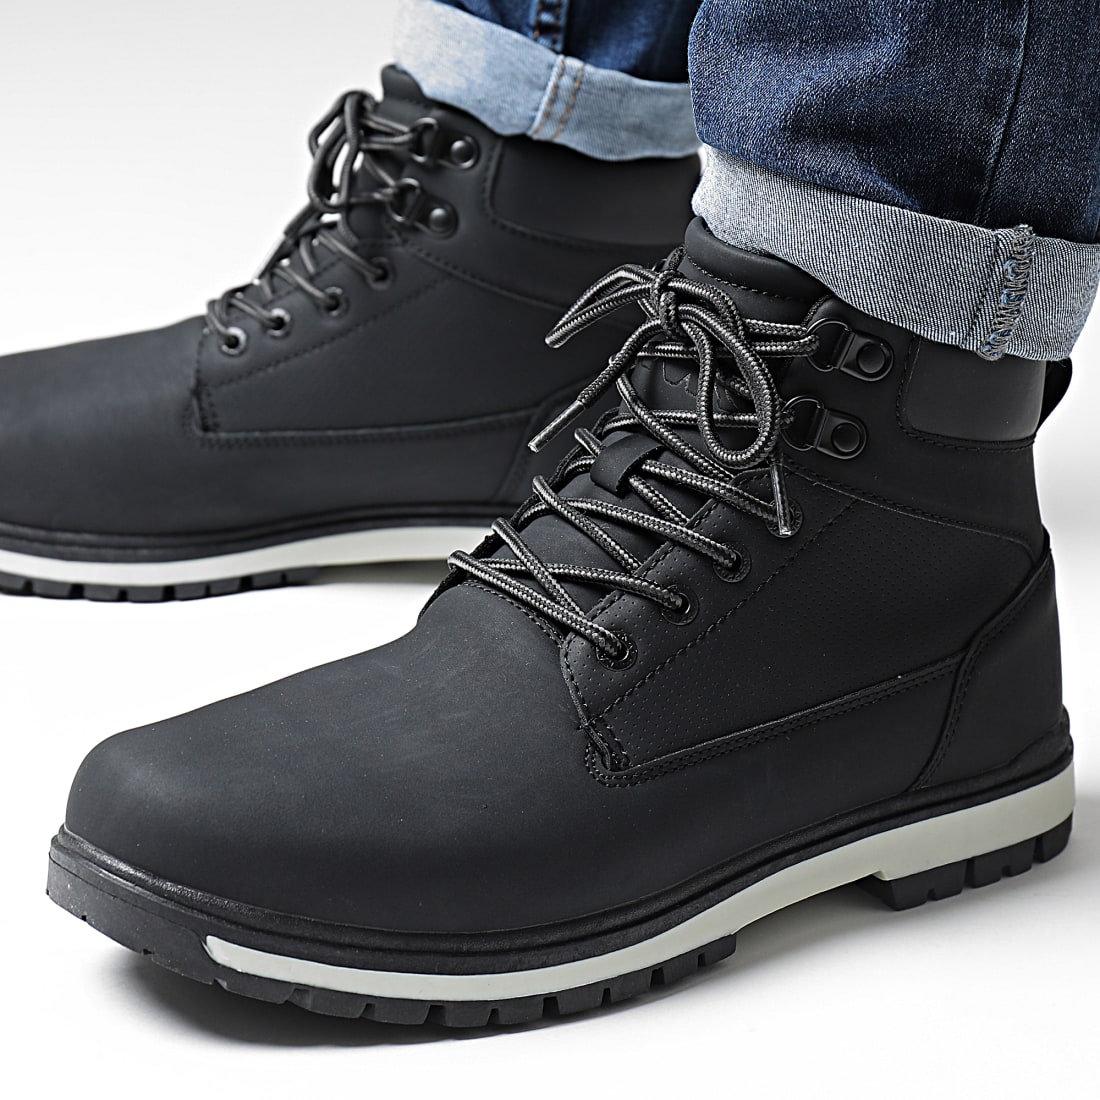 Boots, chaussures montantes homme en solde KAPPA